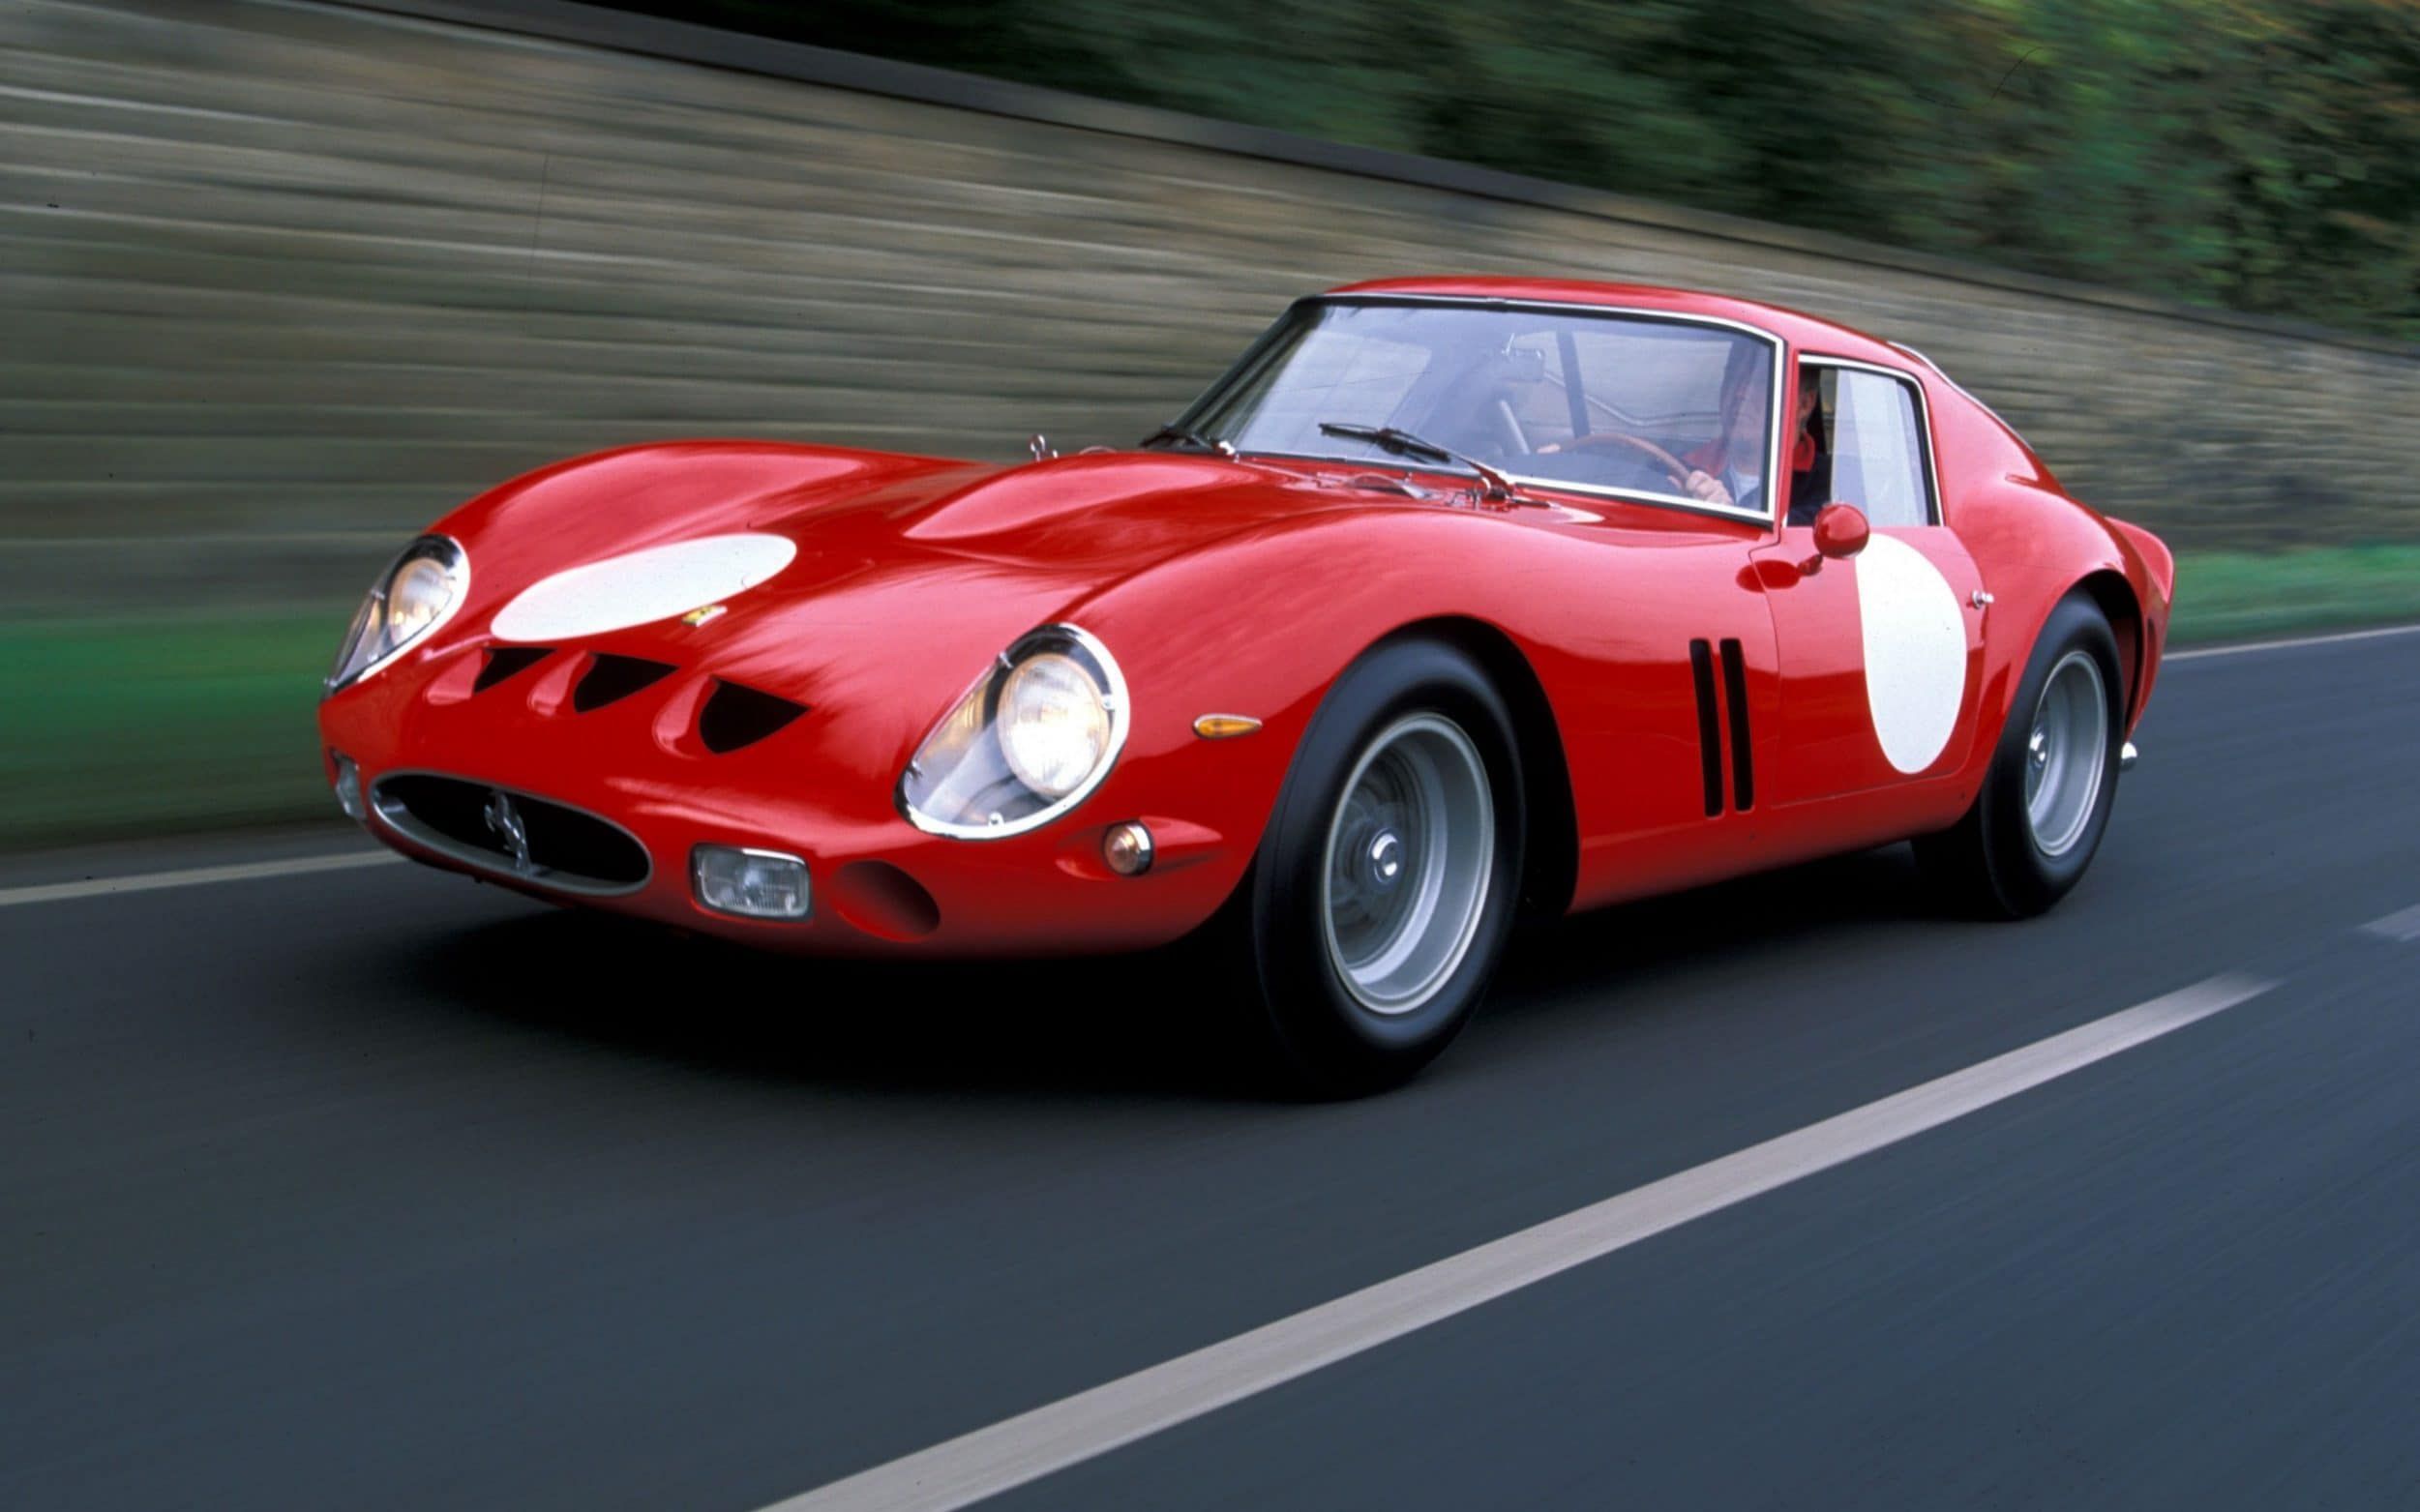 Would You Spend $60 Million on a Ferrari?